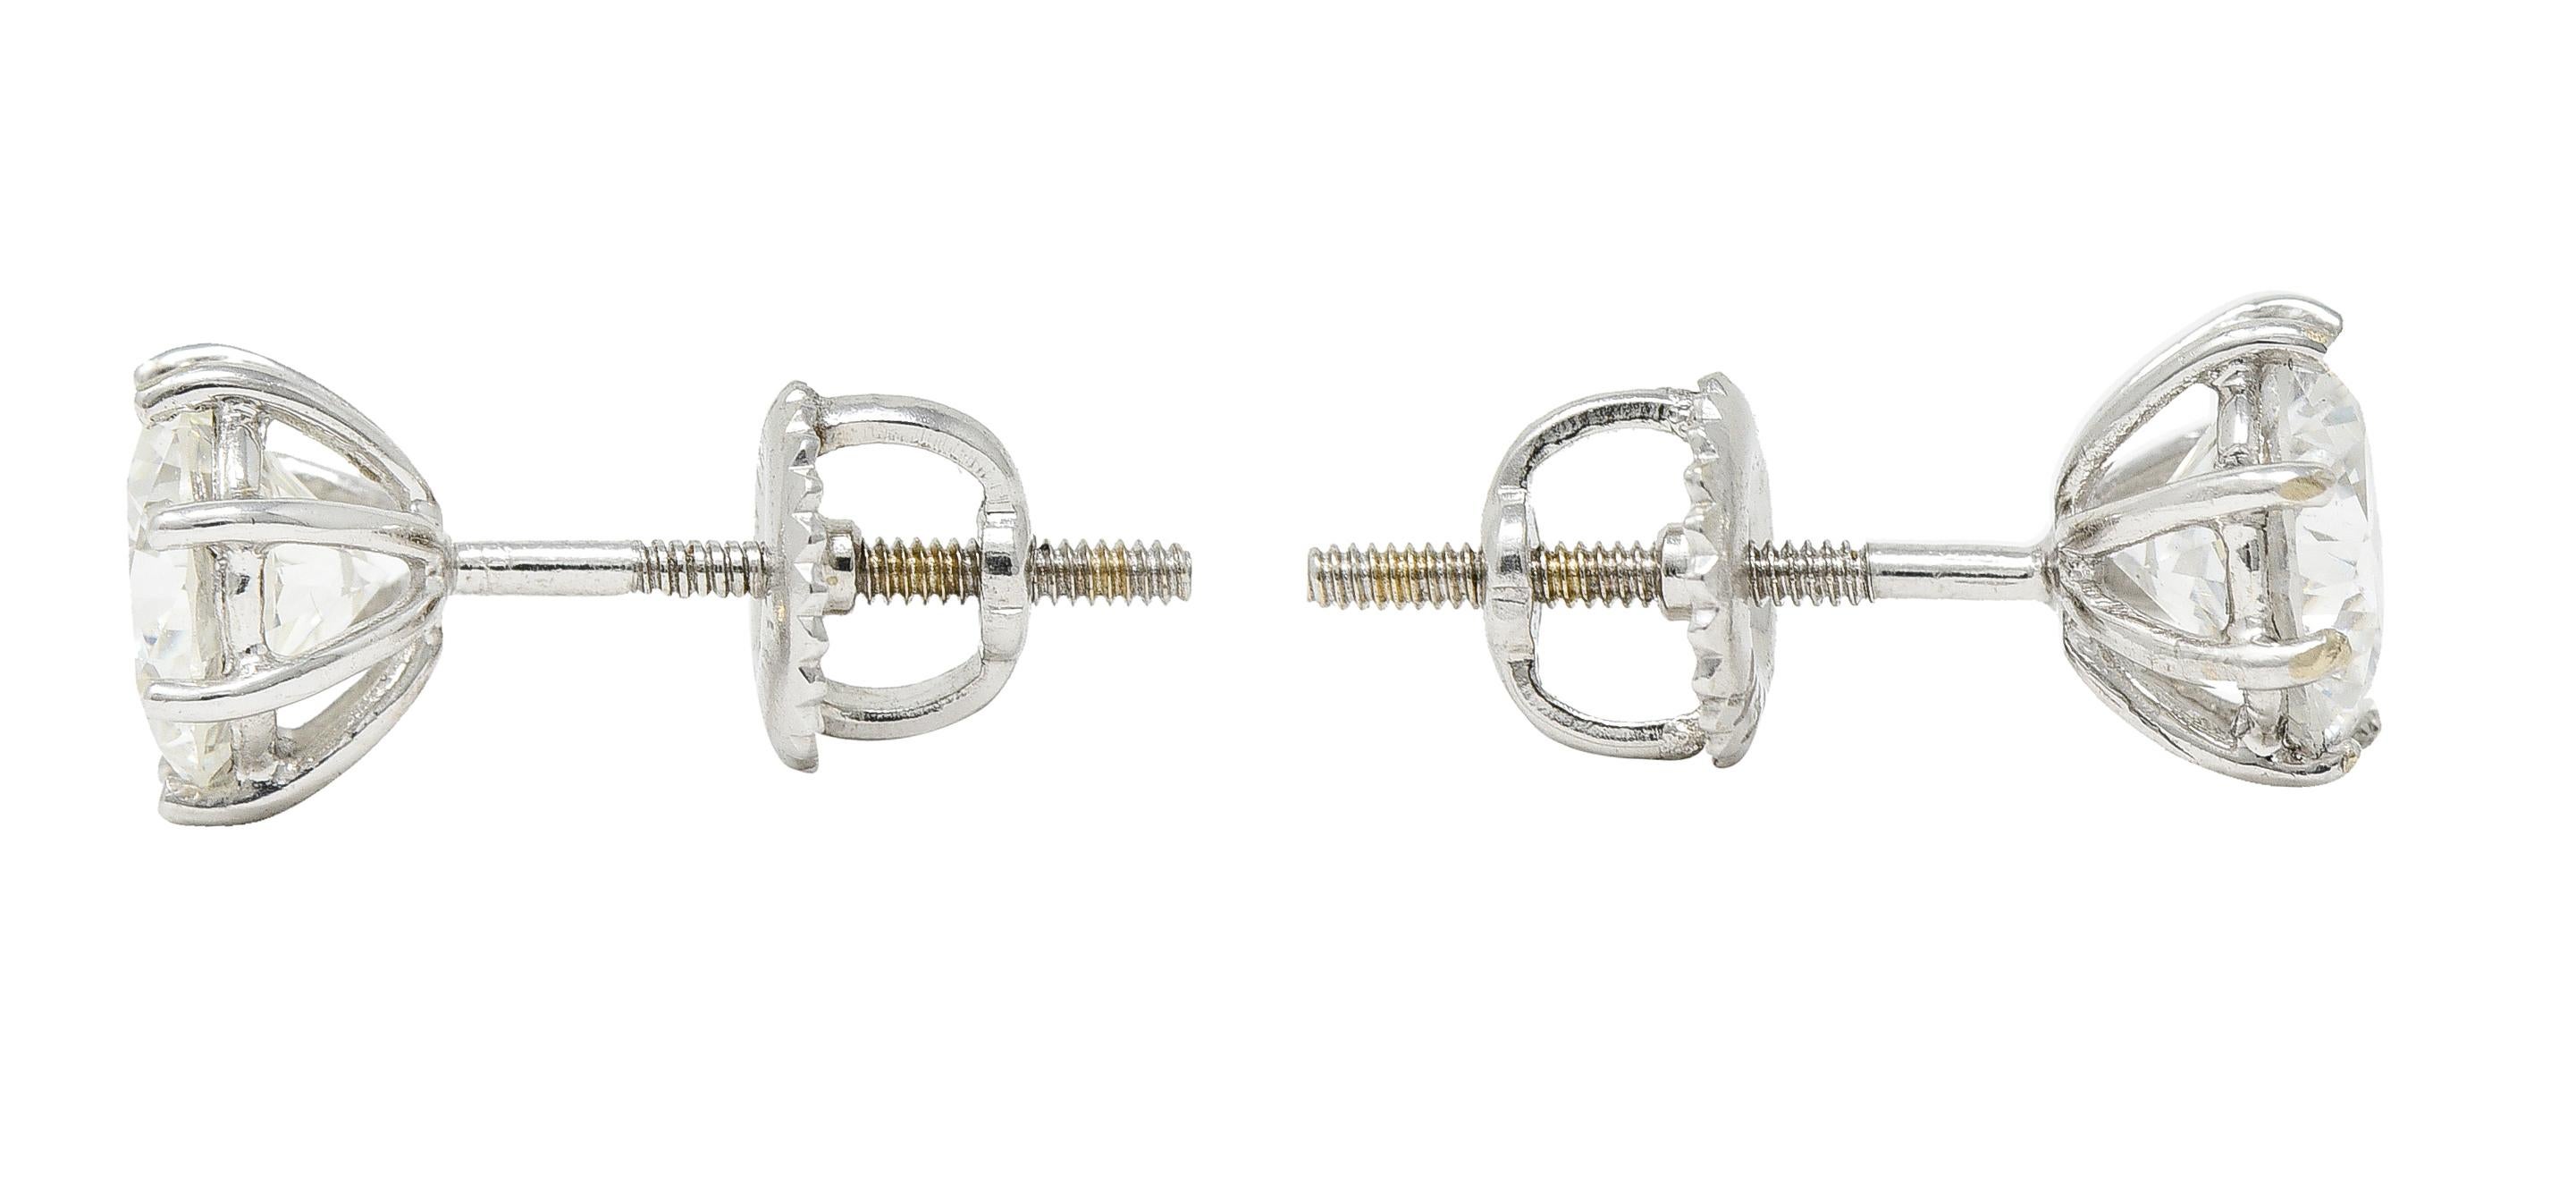 Stud earrings feature round brilliant cut diamonds - very well matched. One weighing approximately 0.92 carat with G color and VS2 clarity. Other weighs approximately 0.94 carat with H color and VS2 clarity. Securely set via eight prongs with a